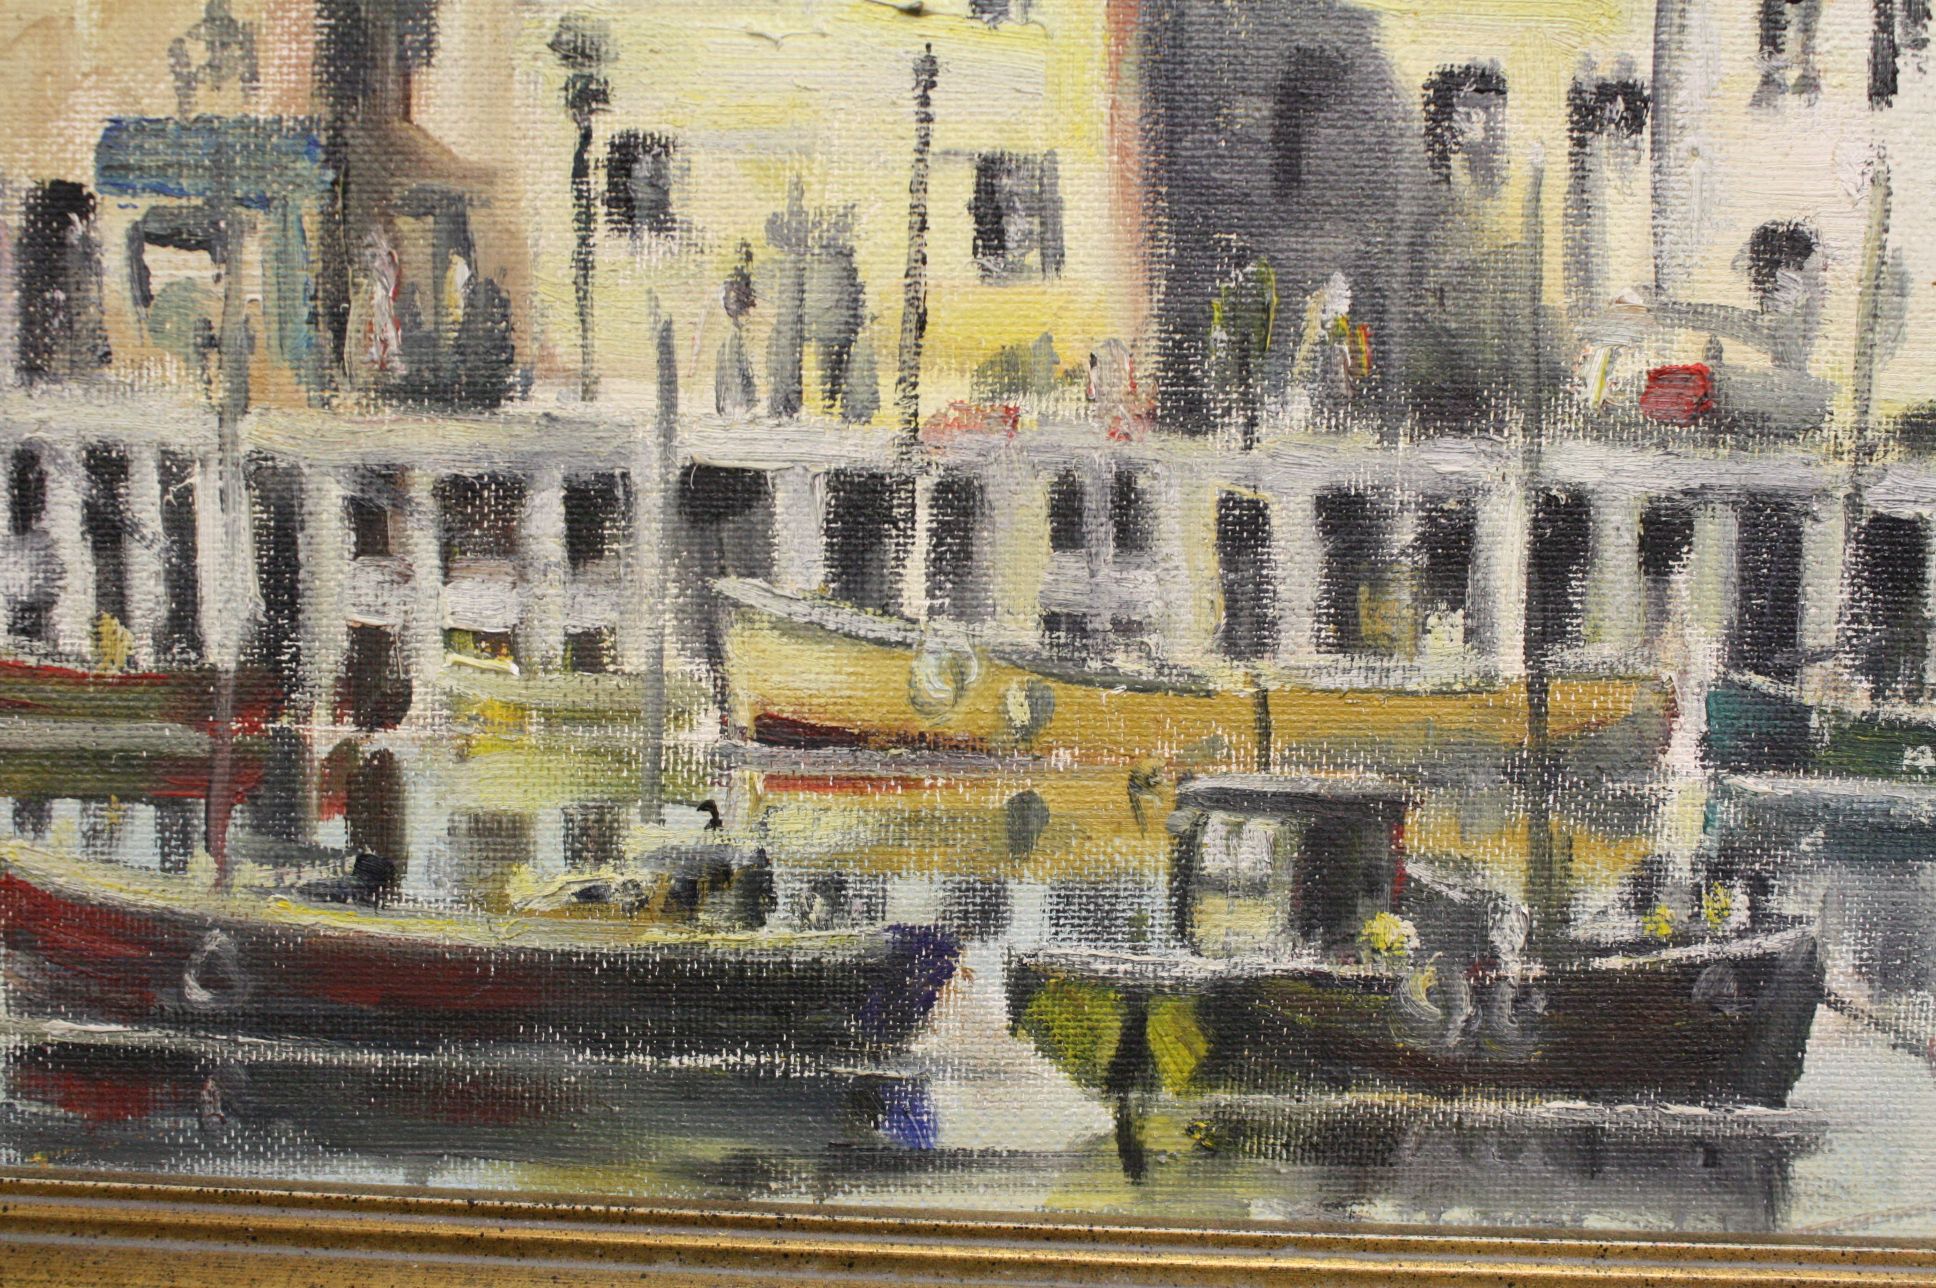 C D Taylor, Oil Painting of Whitby Harbour signed and dated bottom right 1968, 63cms x 48cms, framed - Image 2 of 4